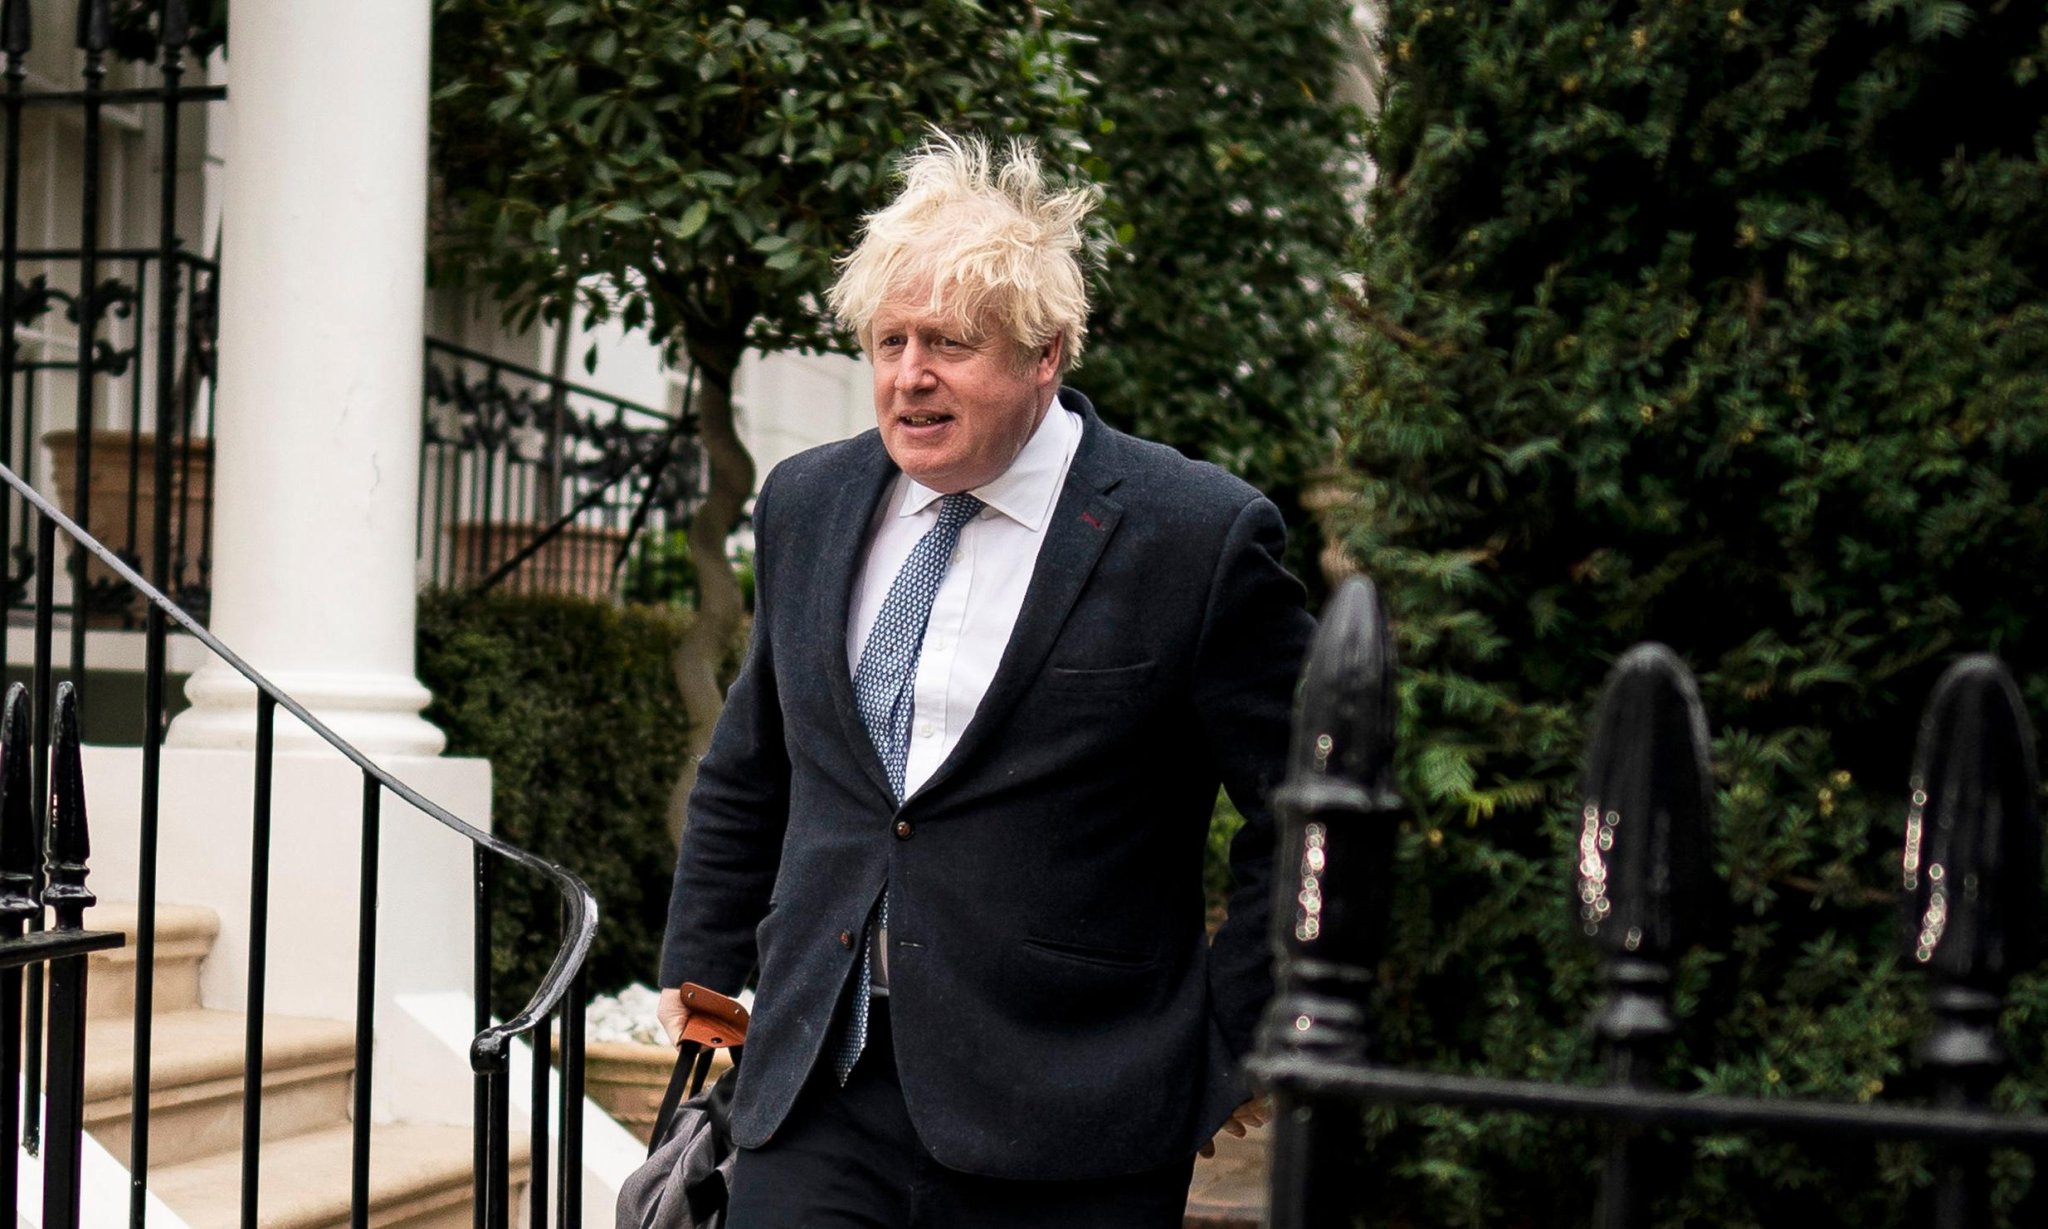 Partygate: Boris Johnson admits he misled Commons, but ‘in good faith’